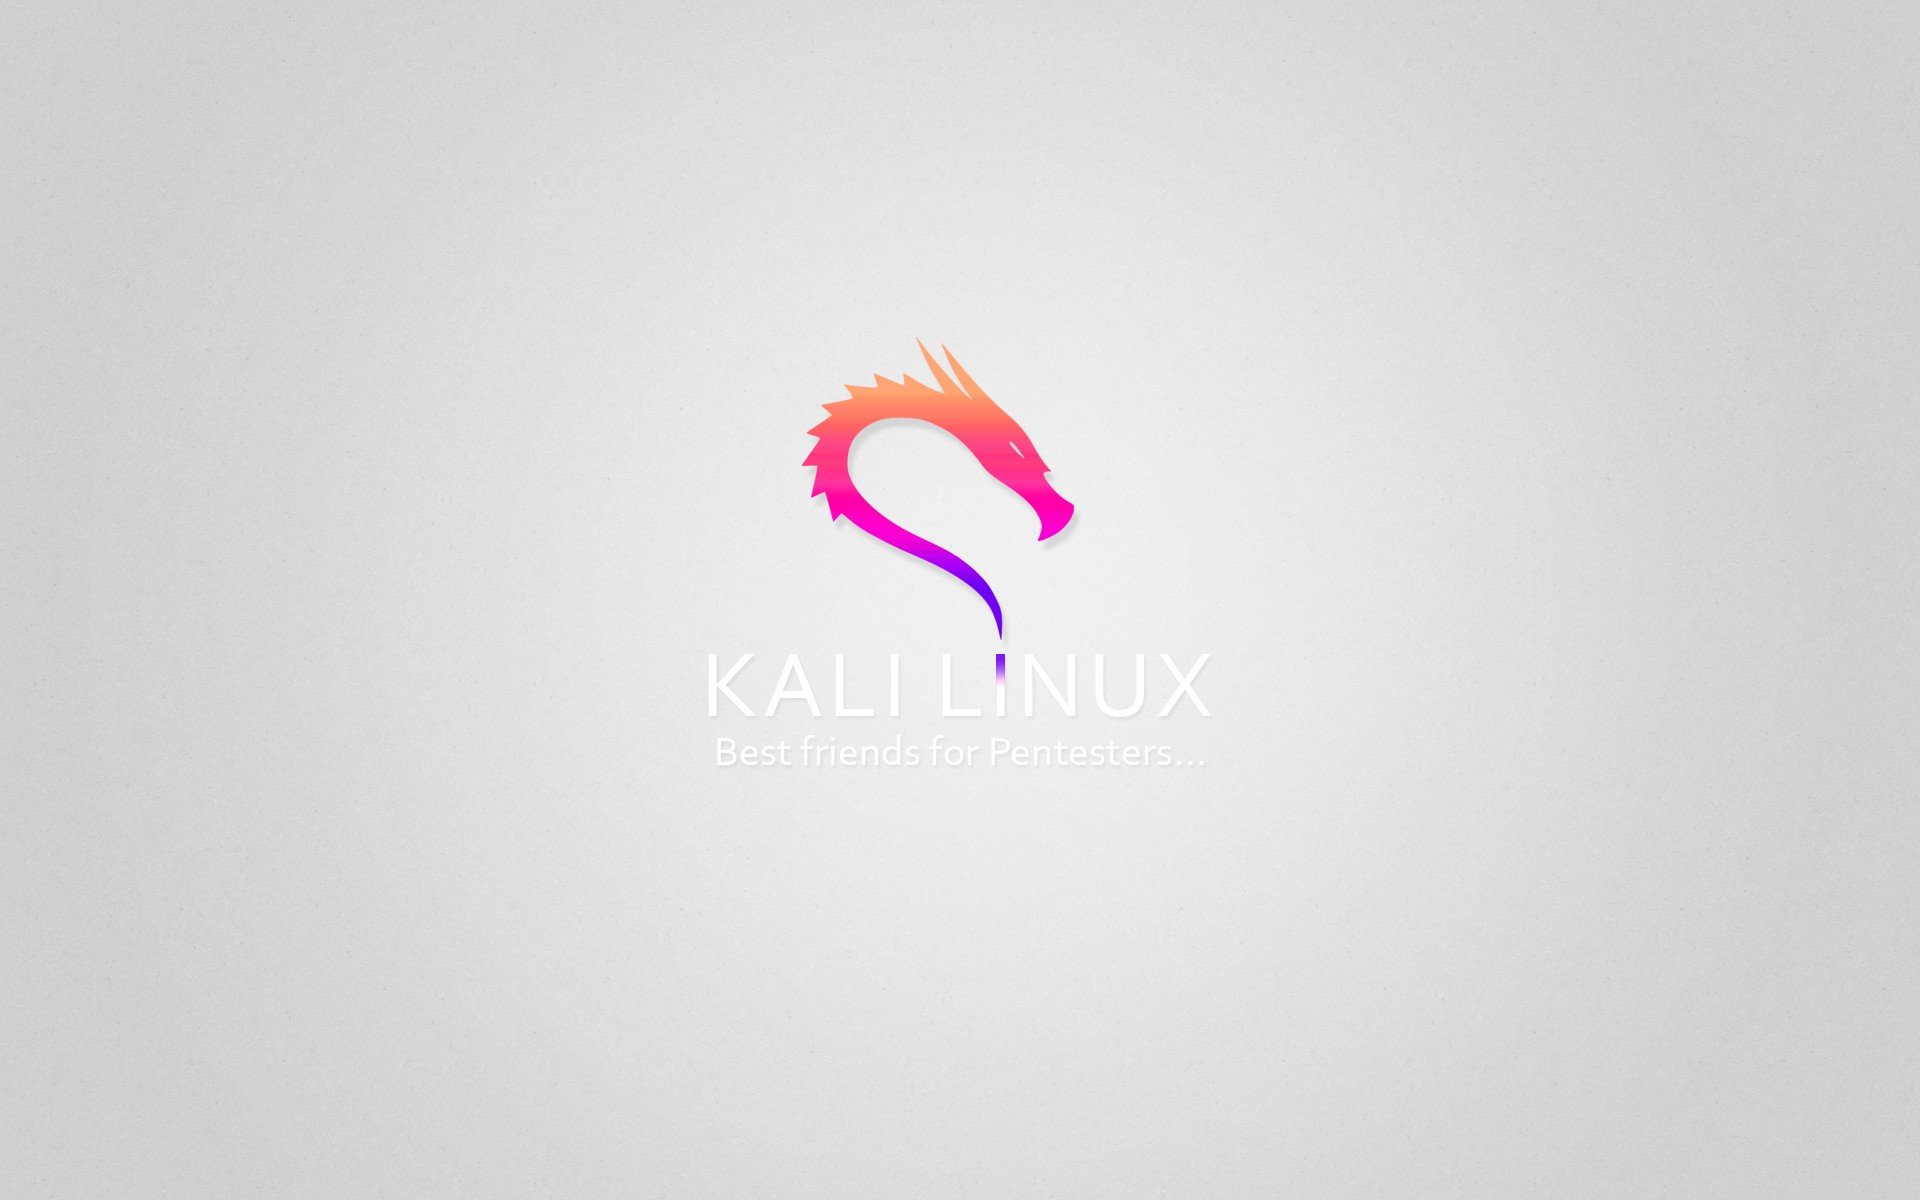 Kali Linux, Linux, Computer, Simple, Typography, Logo, Hacking, Hackers, Penetration testing, Security, CG Wallpaper